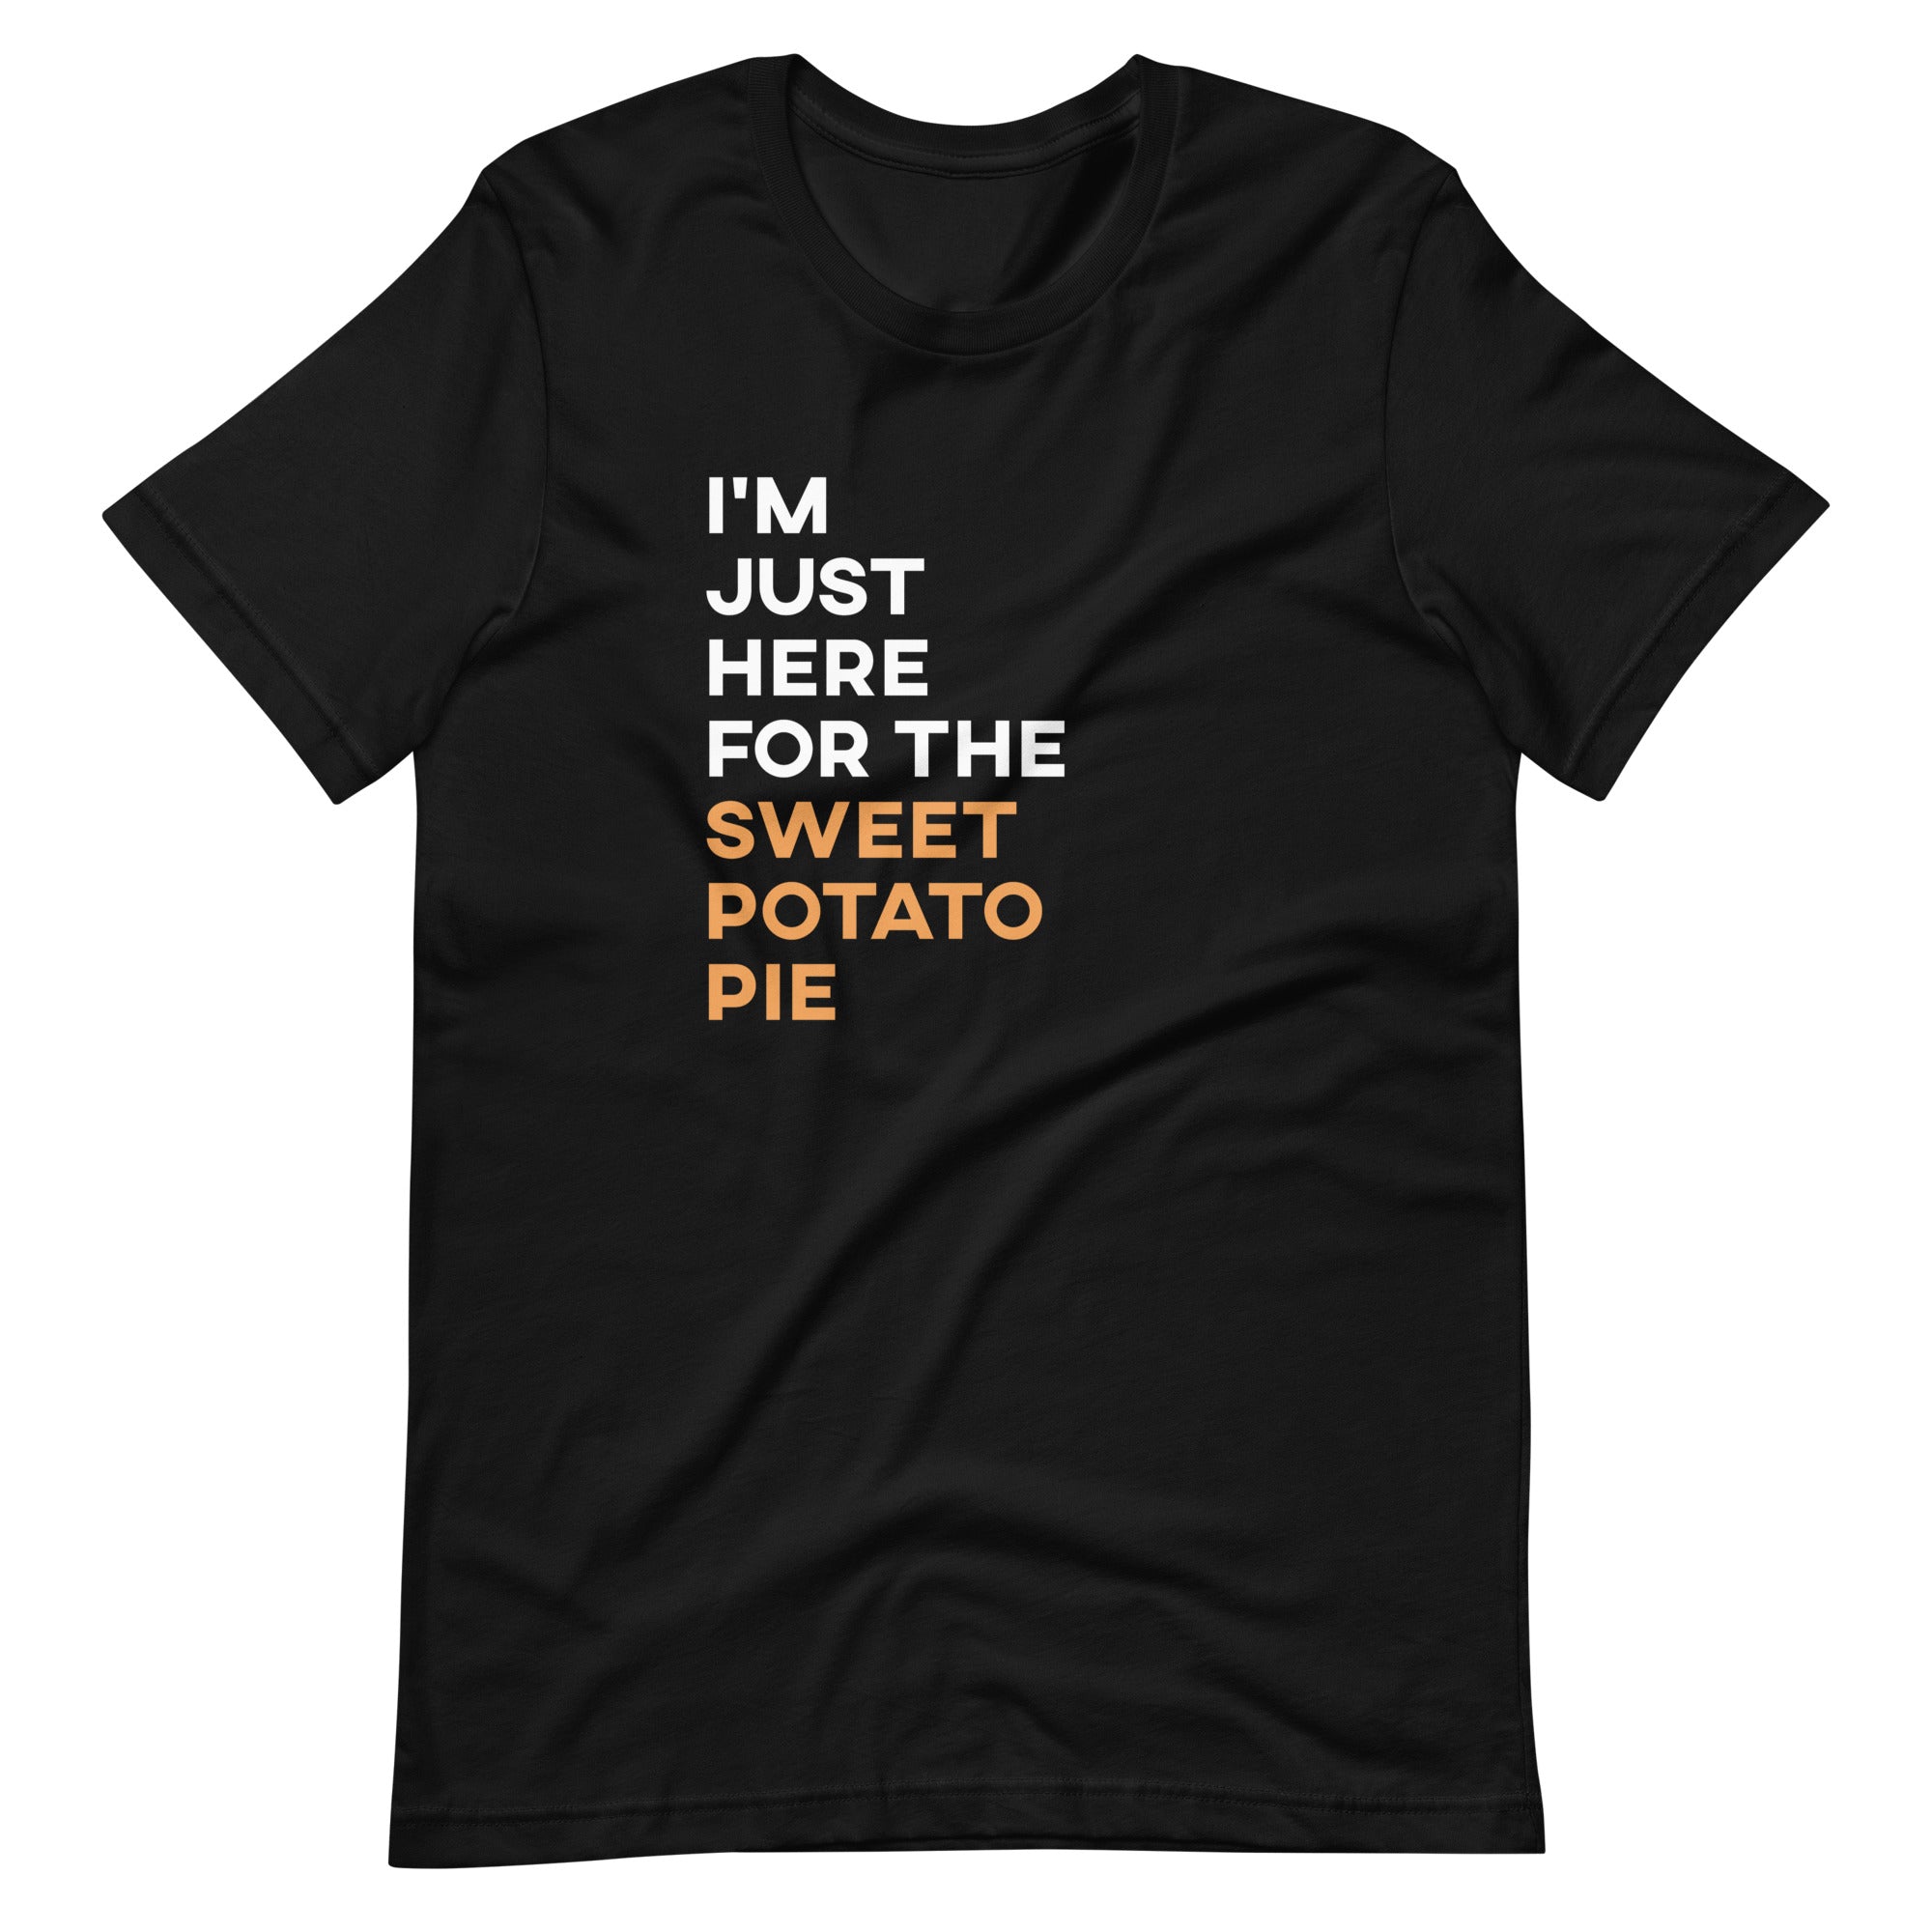 Mike Sorrentino Just Here For The Sweet Potato Pie Shirt